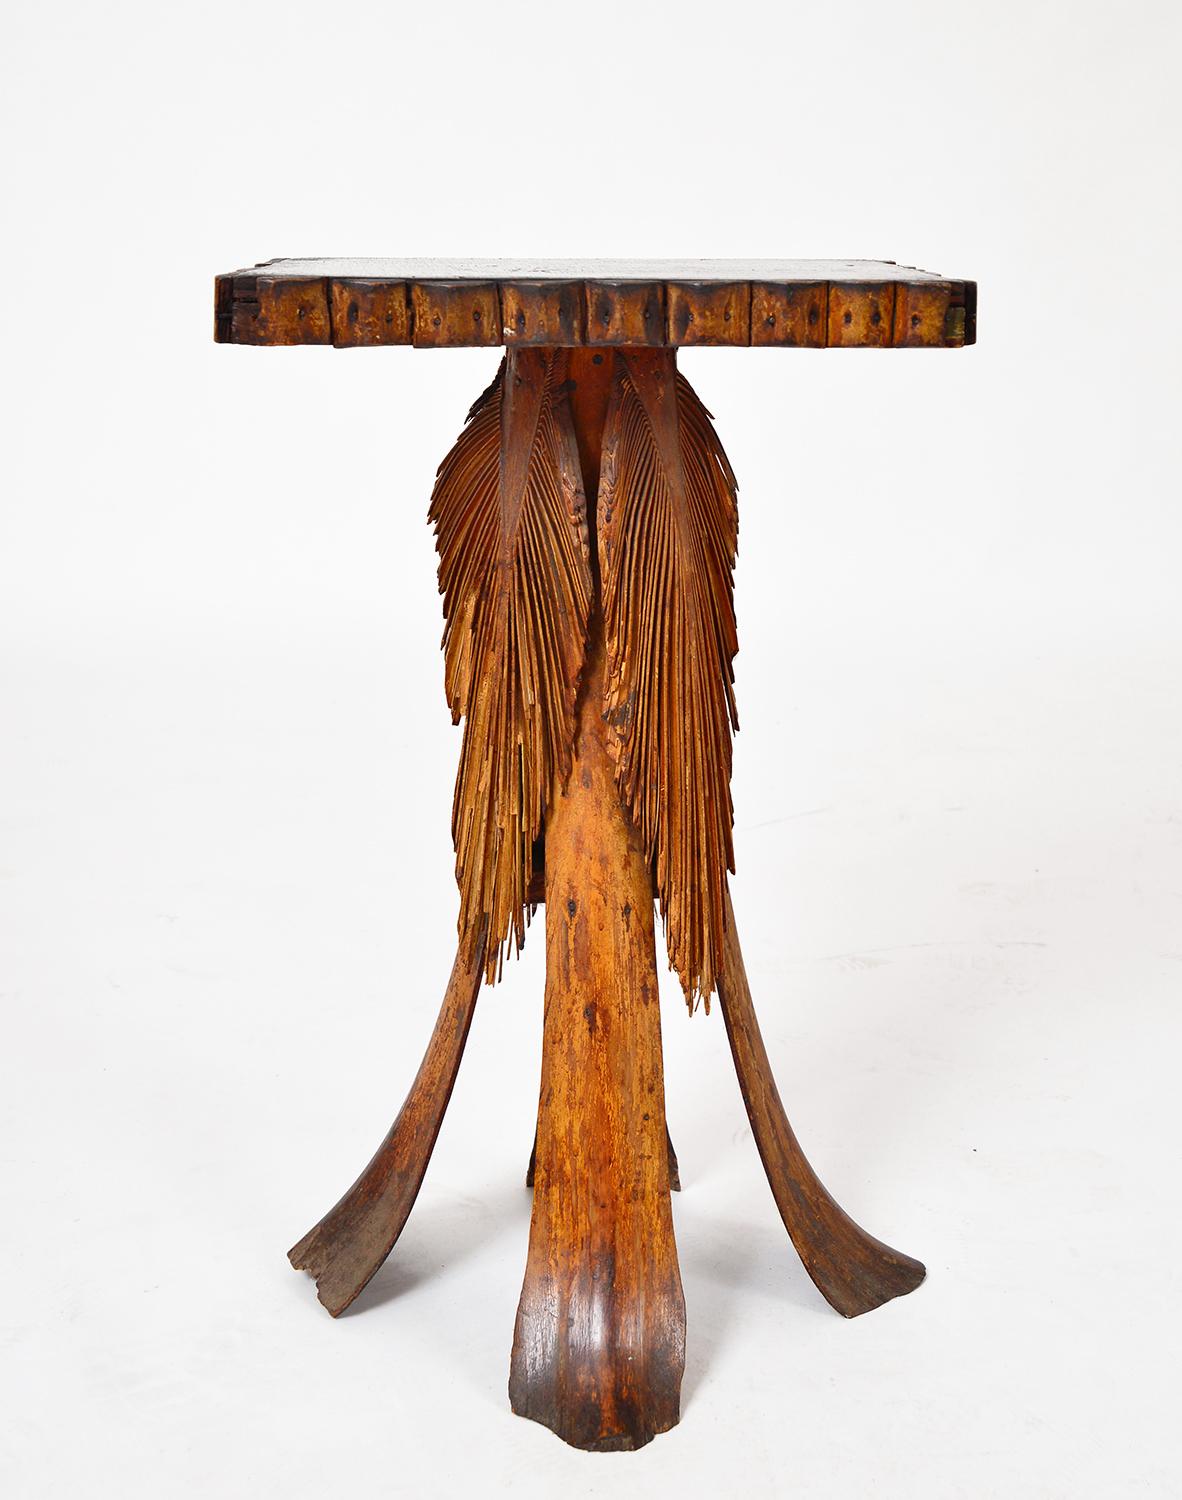 A stunning example of a Folk Art palm frond accent table dating from the early 20th century. The four legs are large palm fronds, flanked by beautiful decorative palm leaves. The top has a decorative tramp art style palm apron and a nicely worn